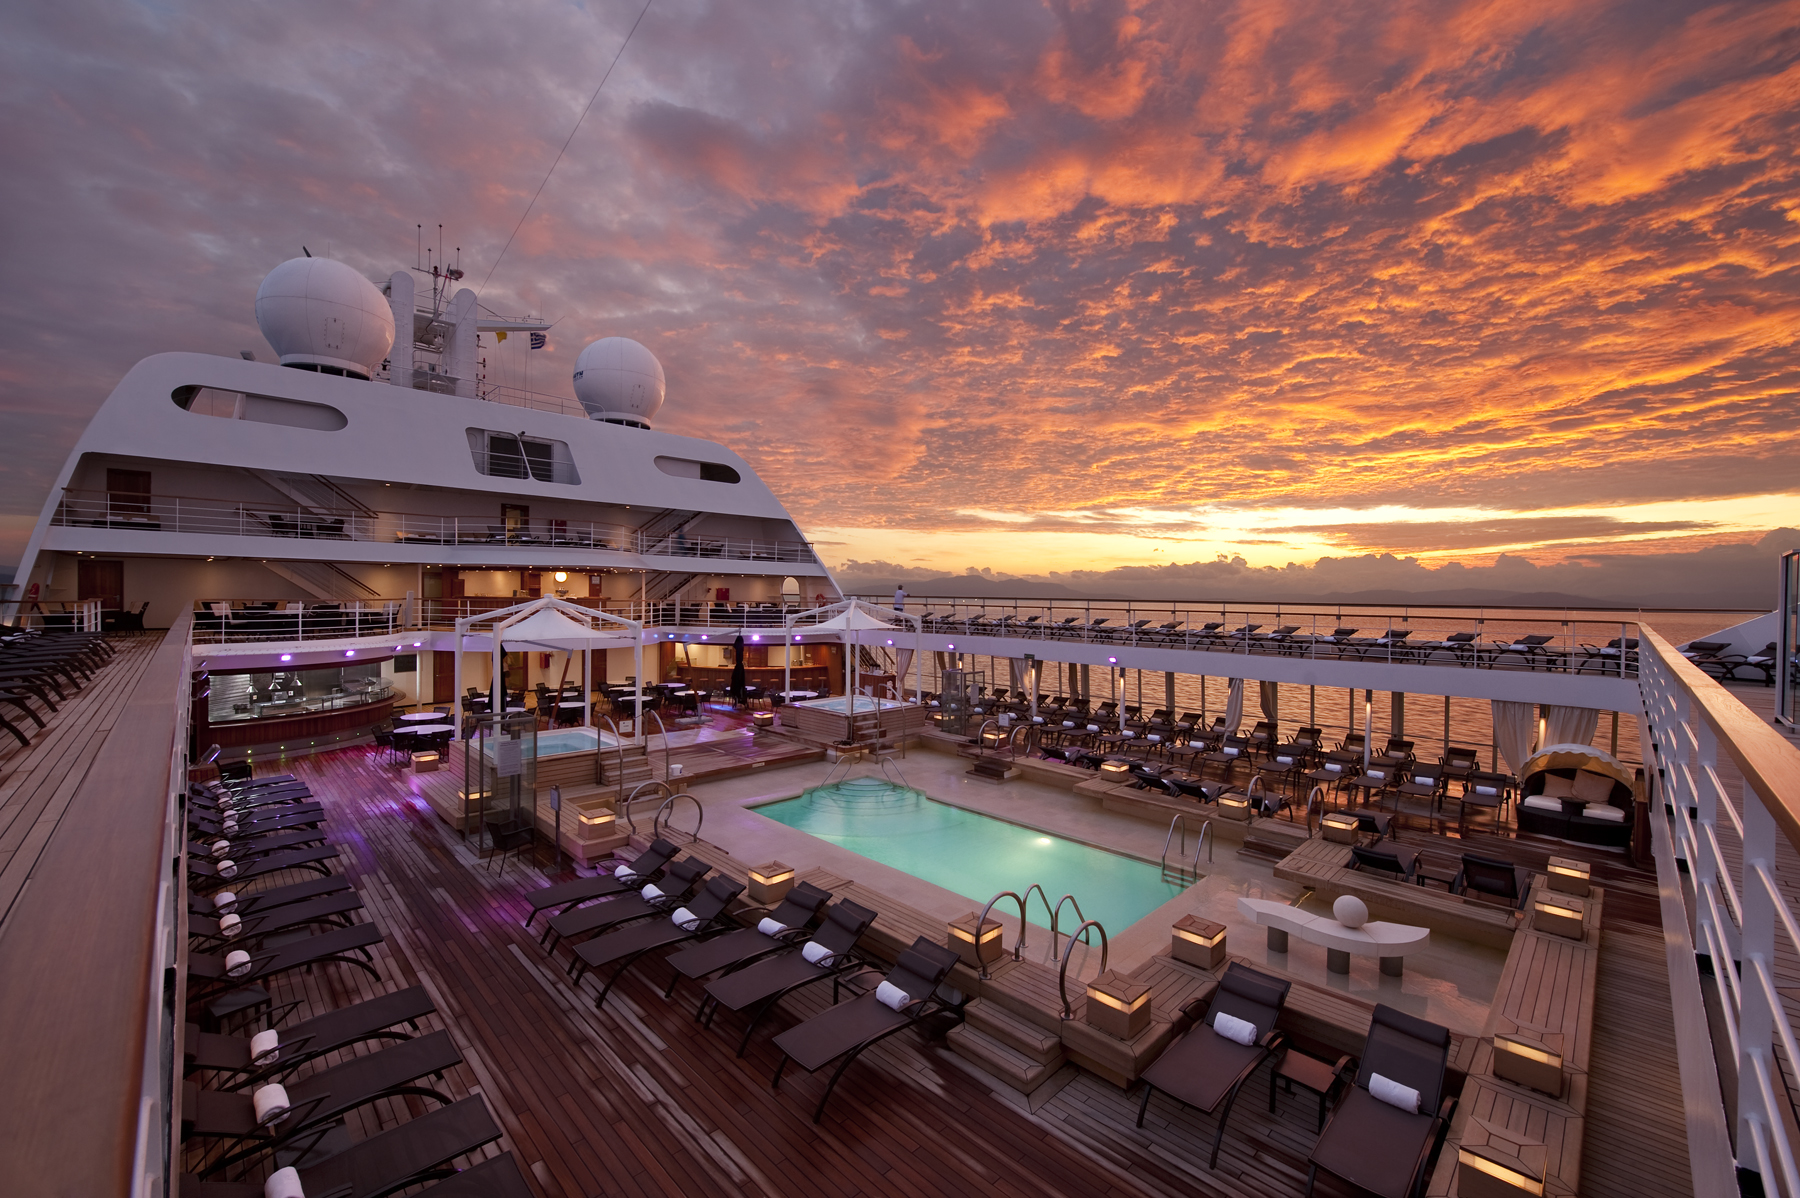 This image: The pool area found mid-ship on board Seabourn Odyssey. Source: Seabourn 